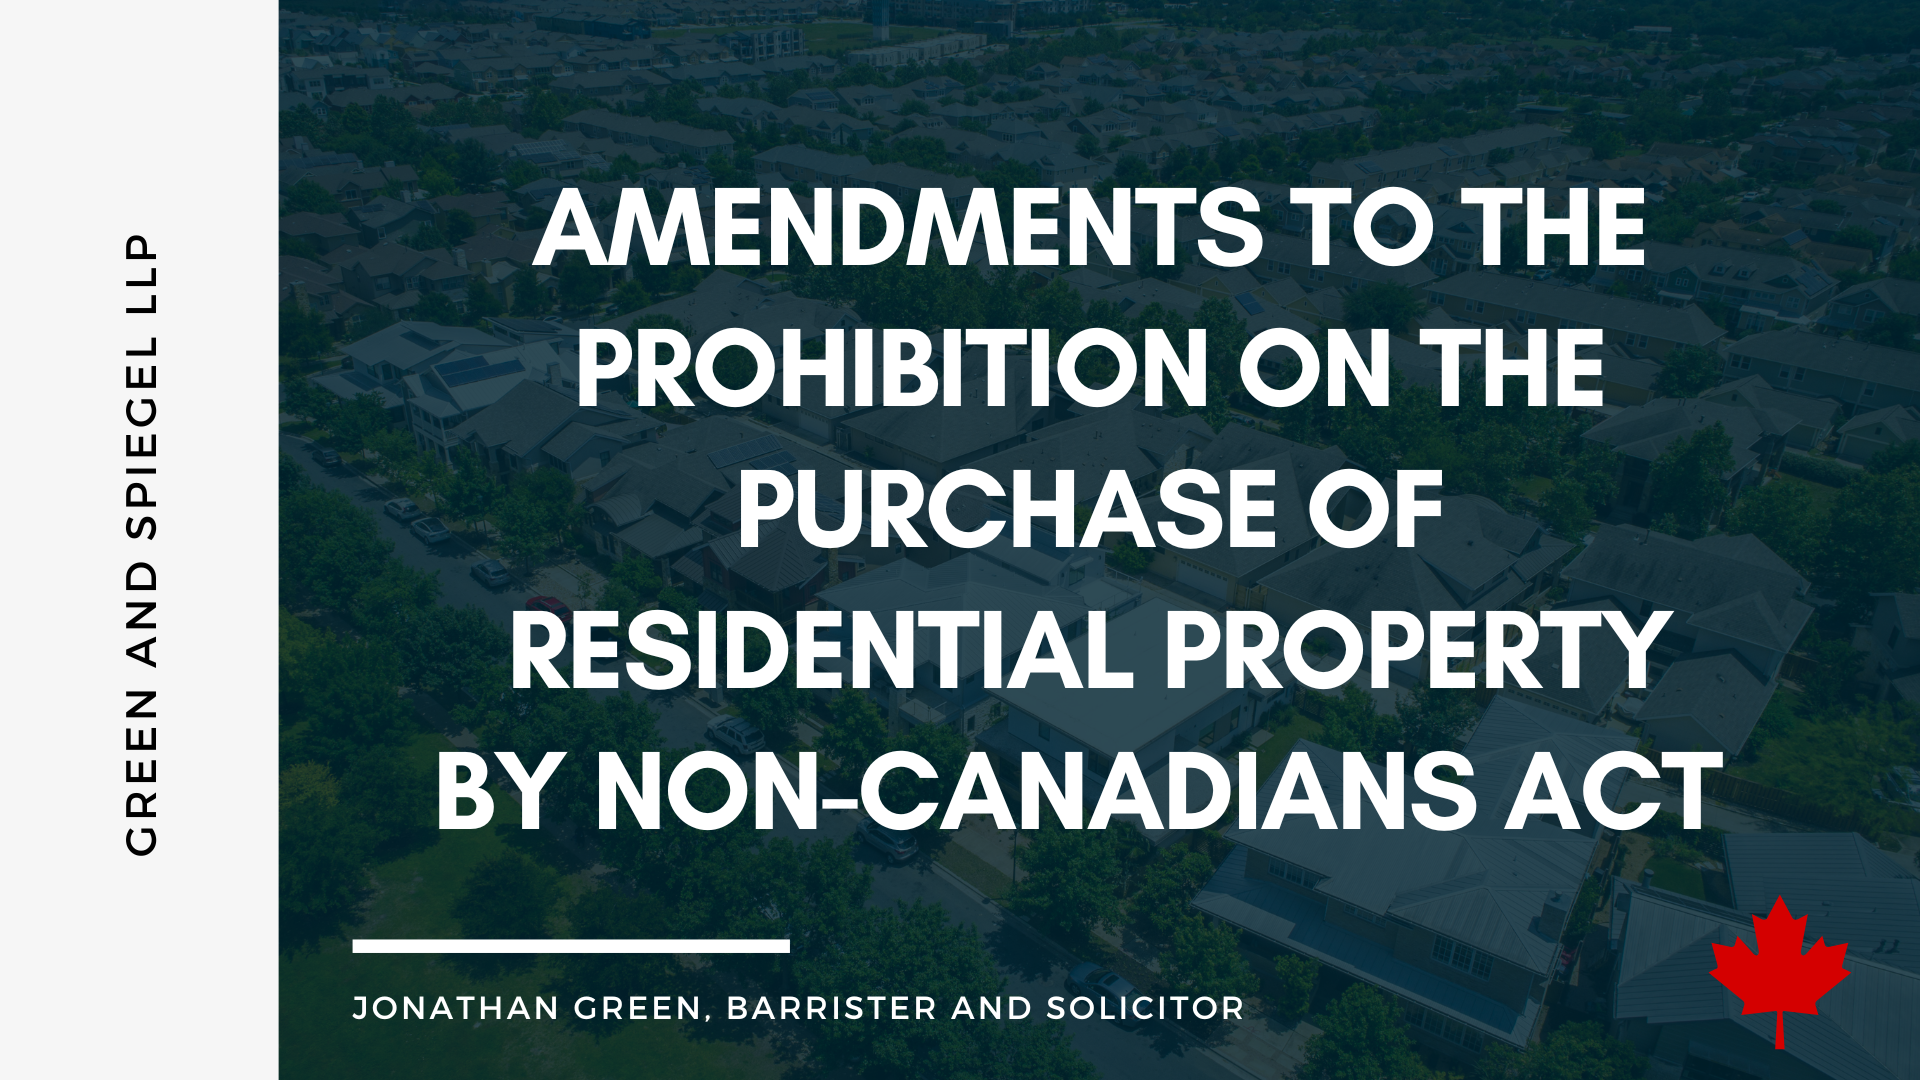 AMENDMENTS TO THE PROHIBITION ON THE PURCHASE OF RESIDENTIAL PROPERTY BY NON-CANADIANS ACT